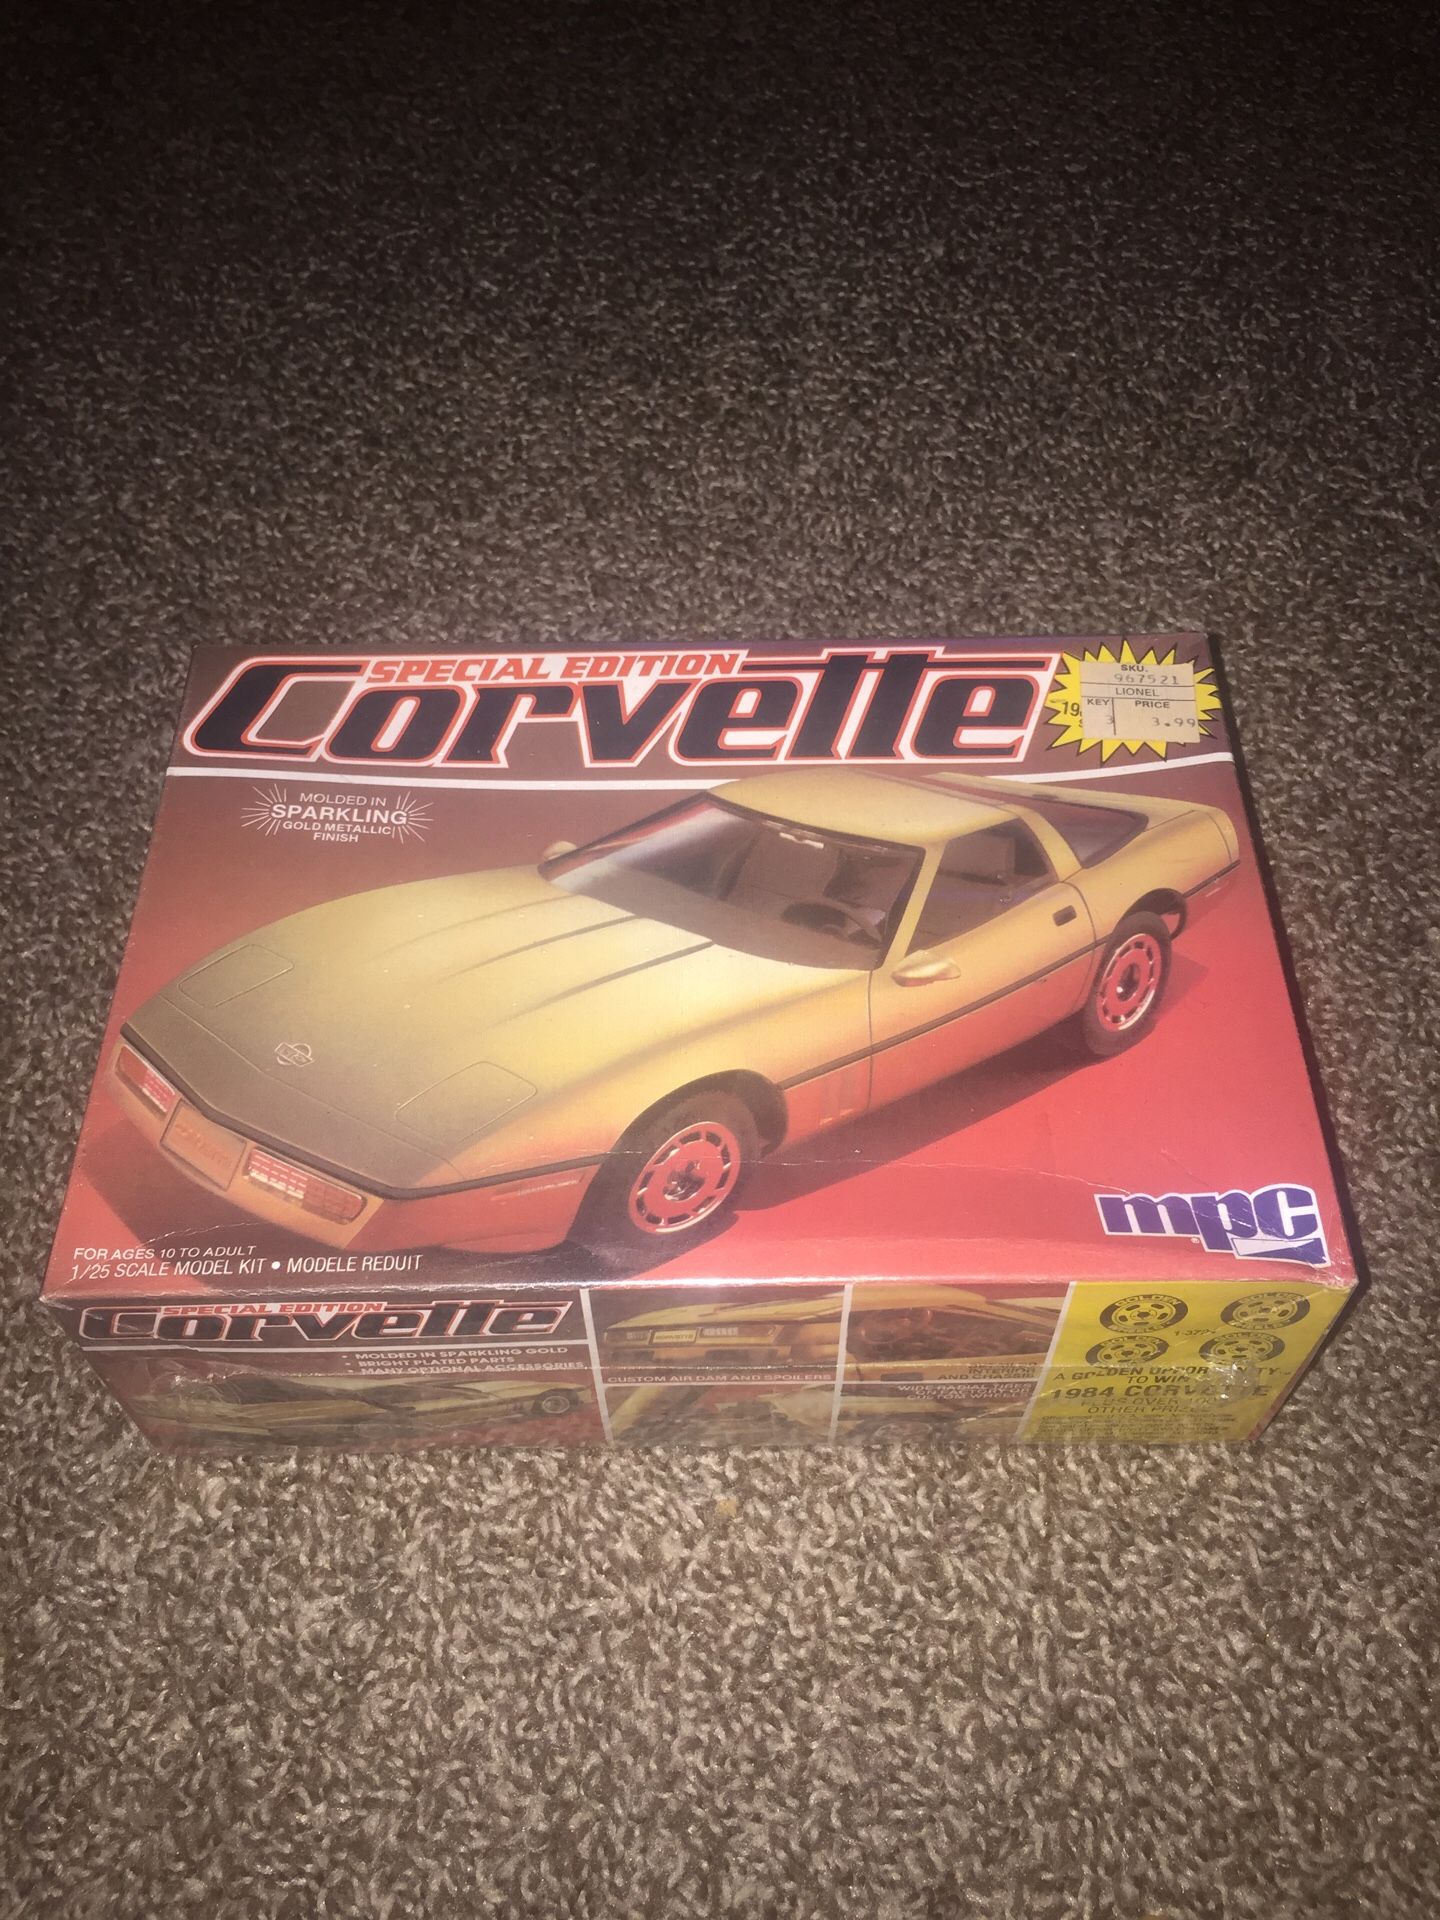 MPC Special Edition 1984 Chevrolet Corvette-Sparkling Gold Issue